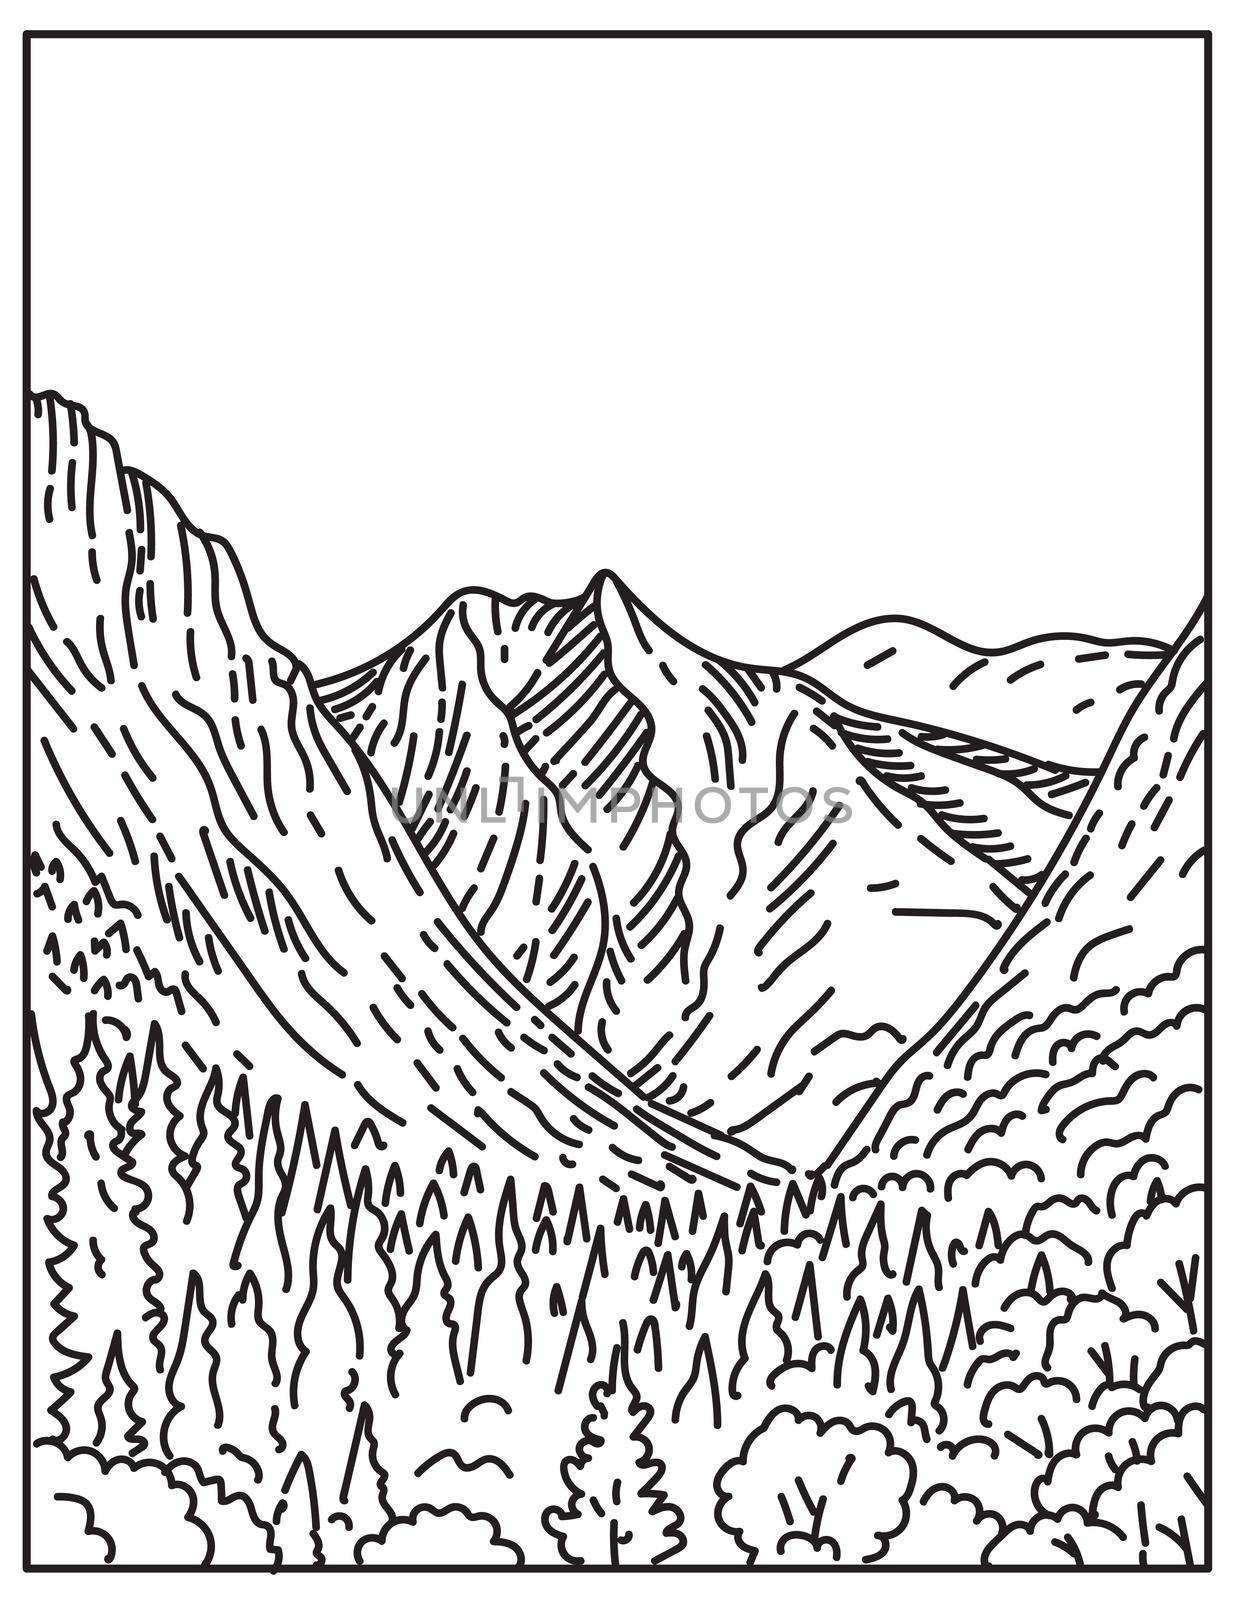 Kings Canyon from Paradise Valley in Kings Canyon National Park within Sierra Nevada California United States Mono Line or Monoline Black and White Line Art by patrimonio